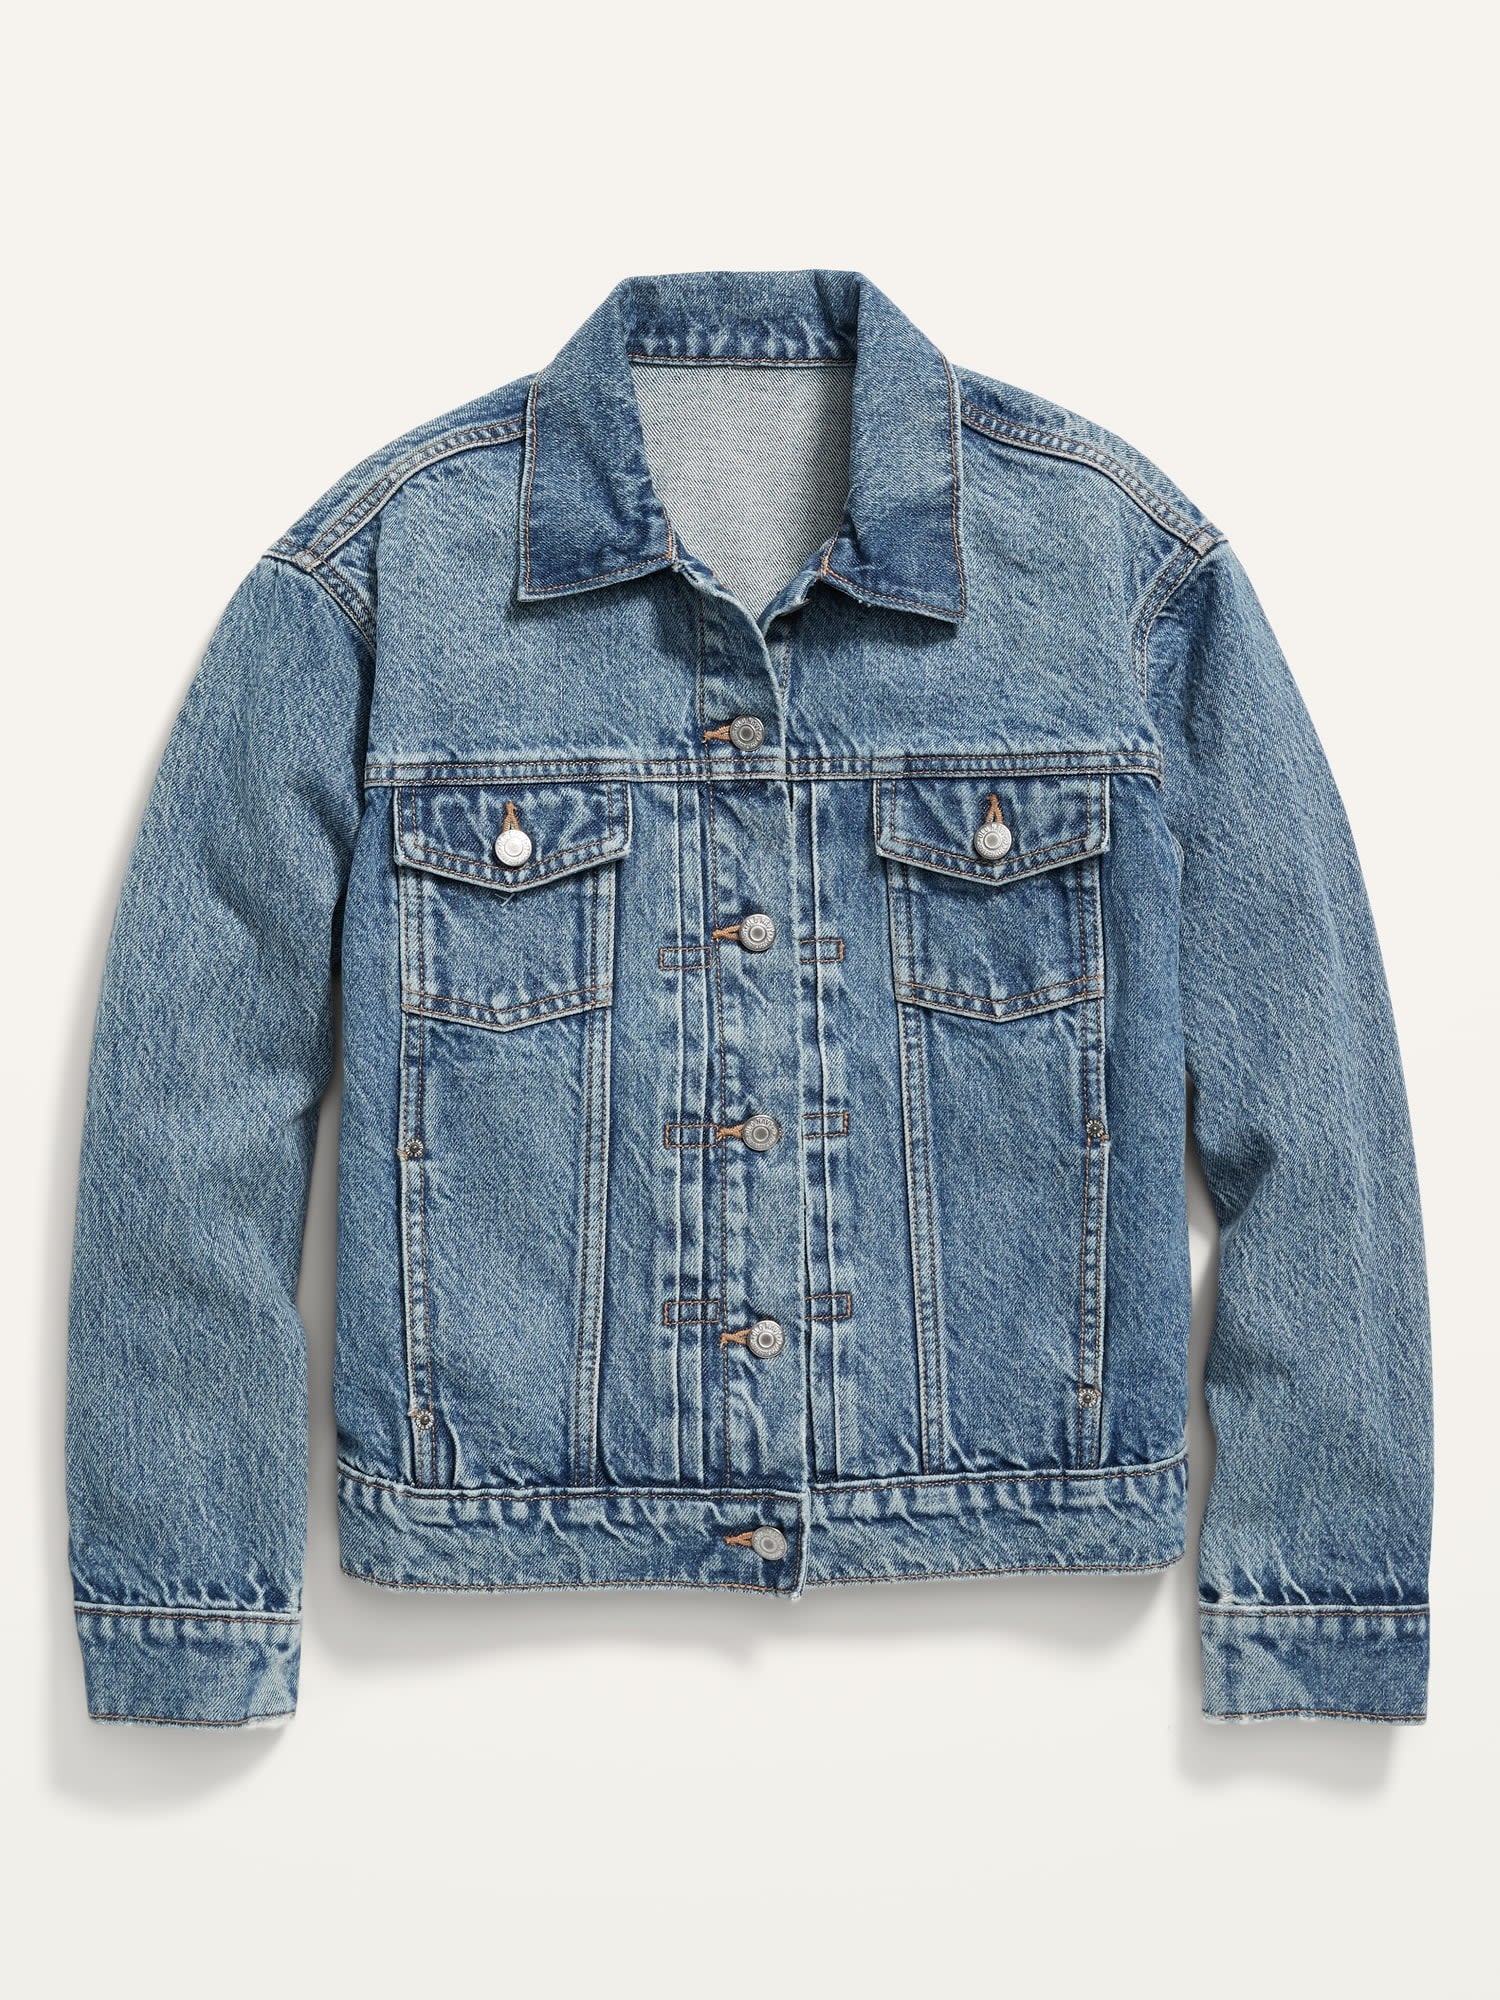 5 Denim Jacket Outfits to Try This Spring | Vogue